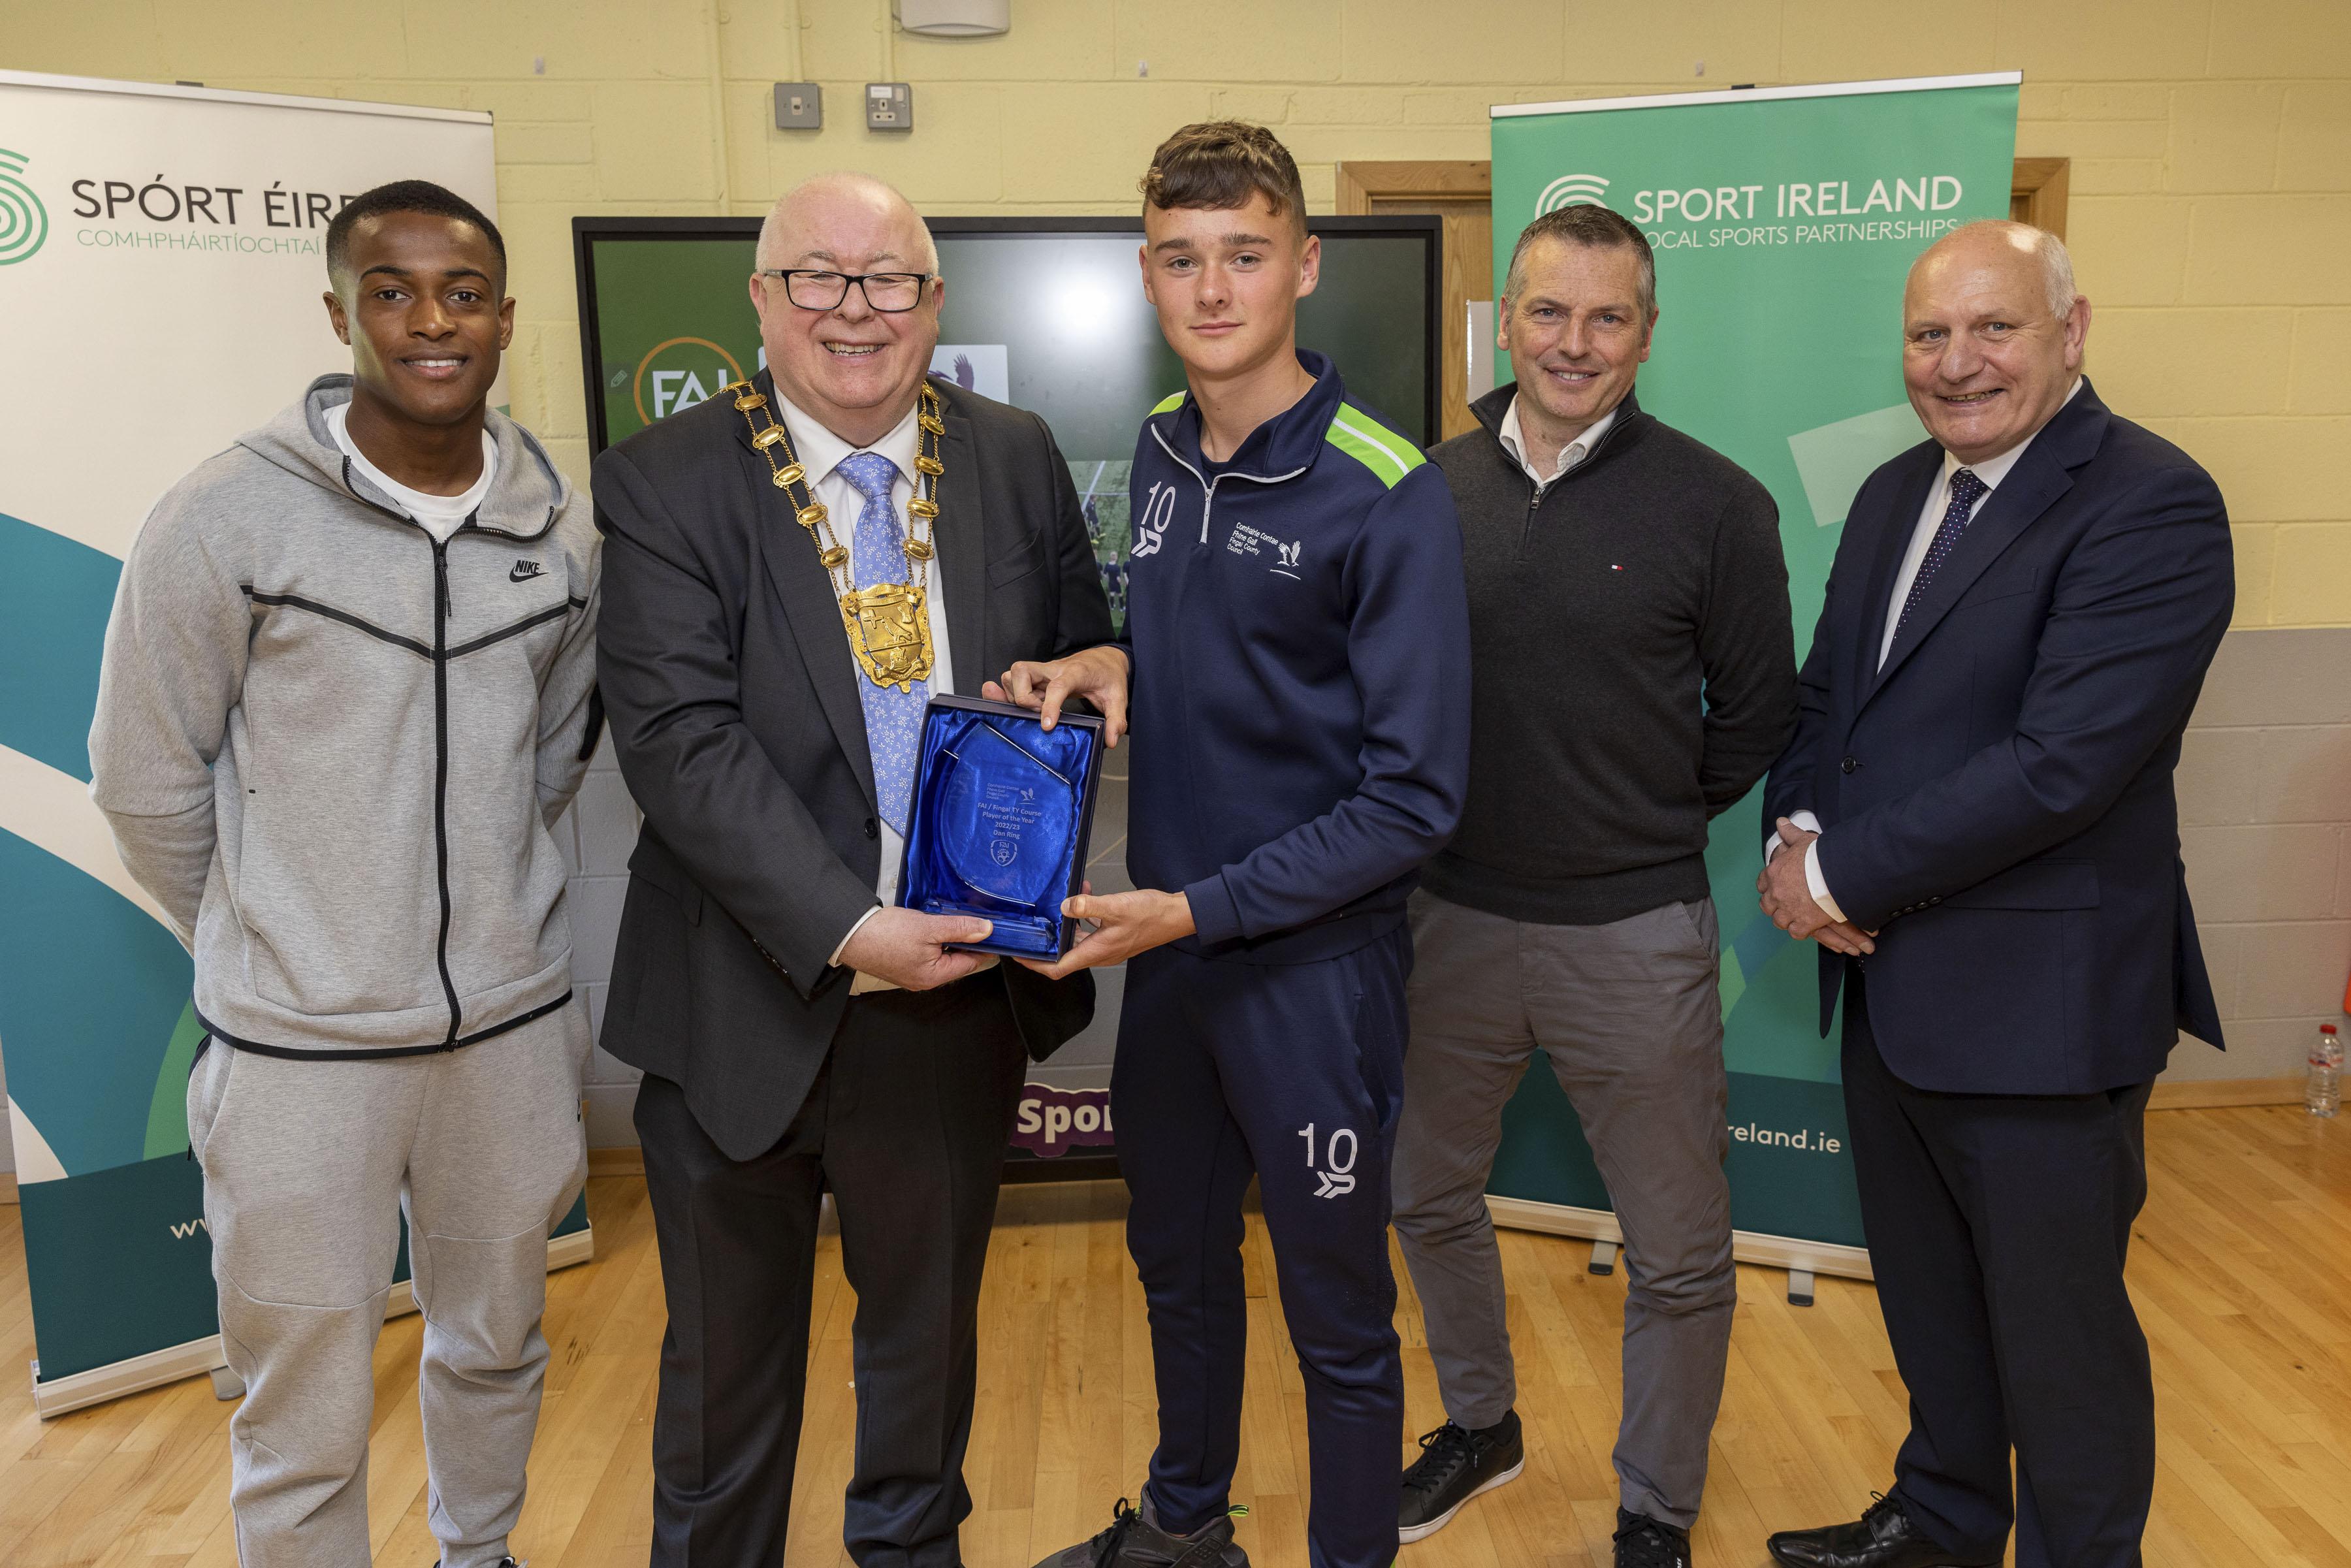 Students including Dan Ring received their accolades from former graduate Aidamo Emakhu, Mayor of Fingal Cllr Howard Mahony, Ireland U-21 manager Jim Crawford and FAI President Gerry McAnaney 